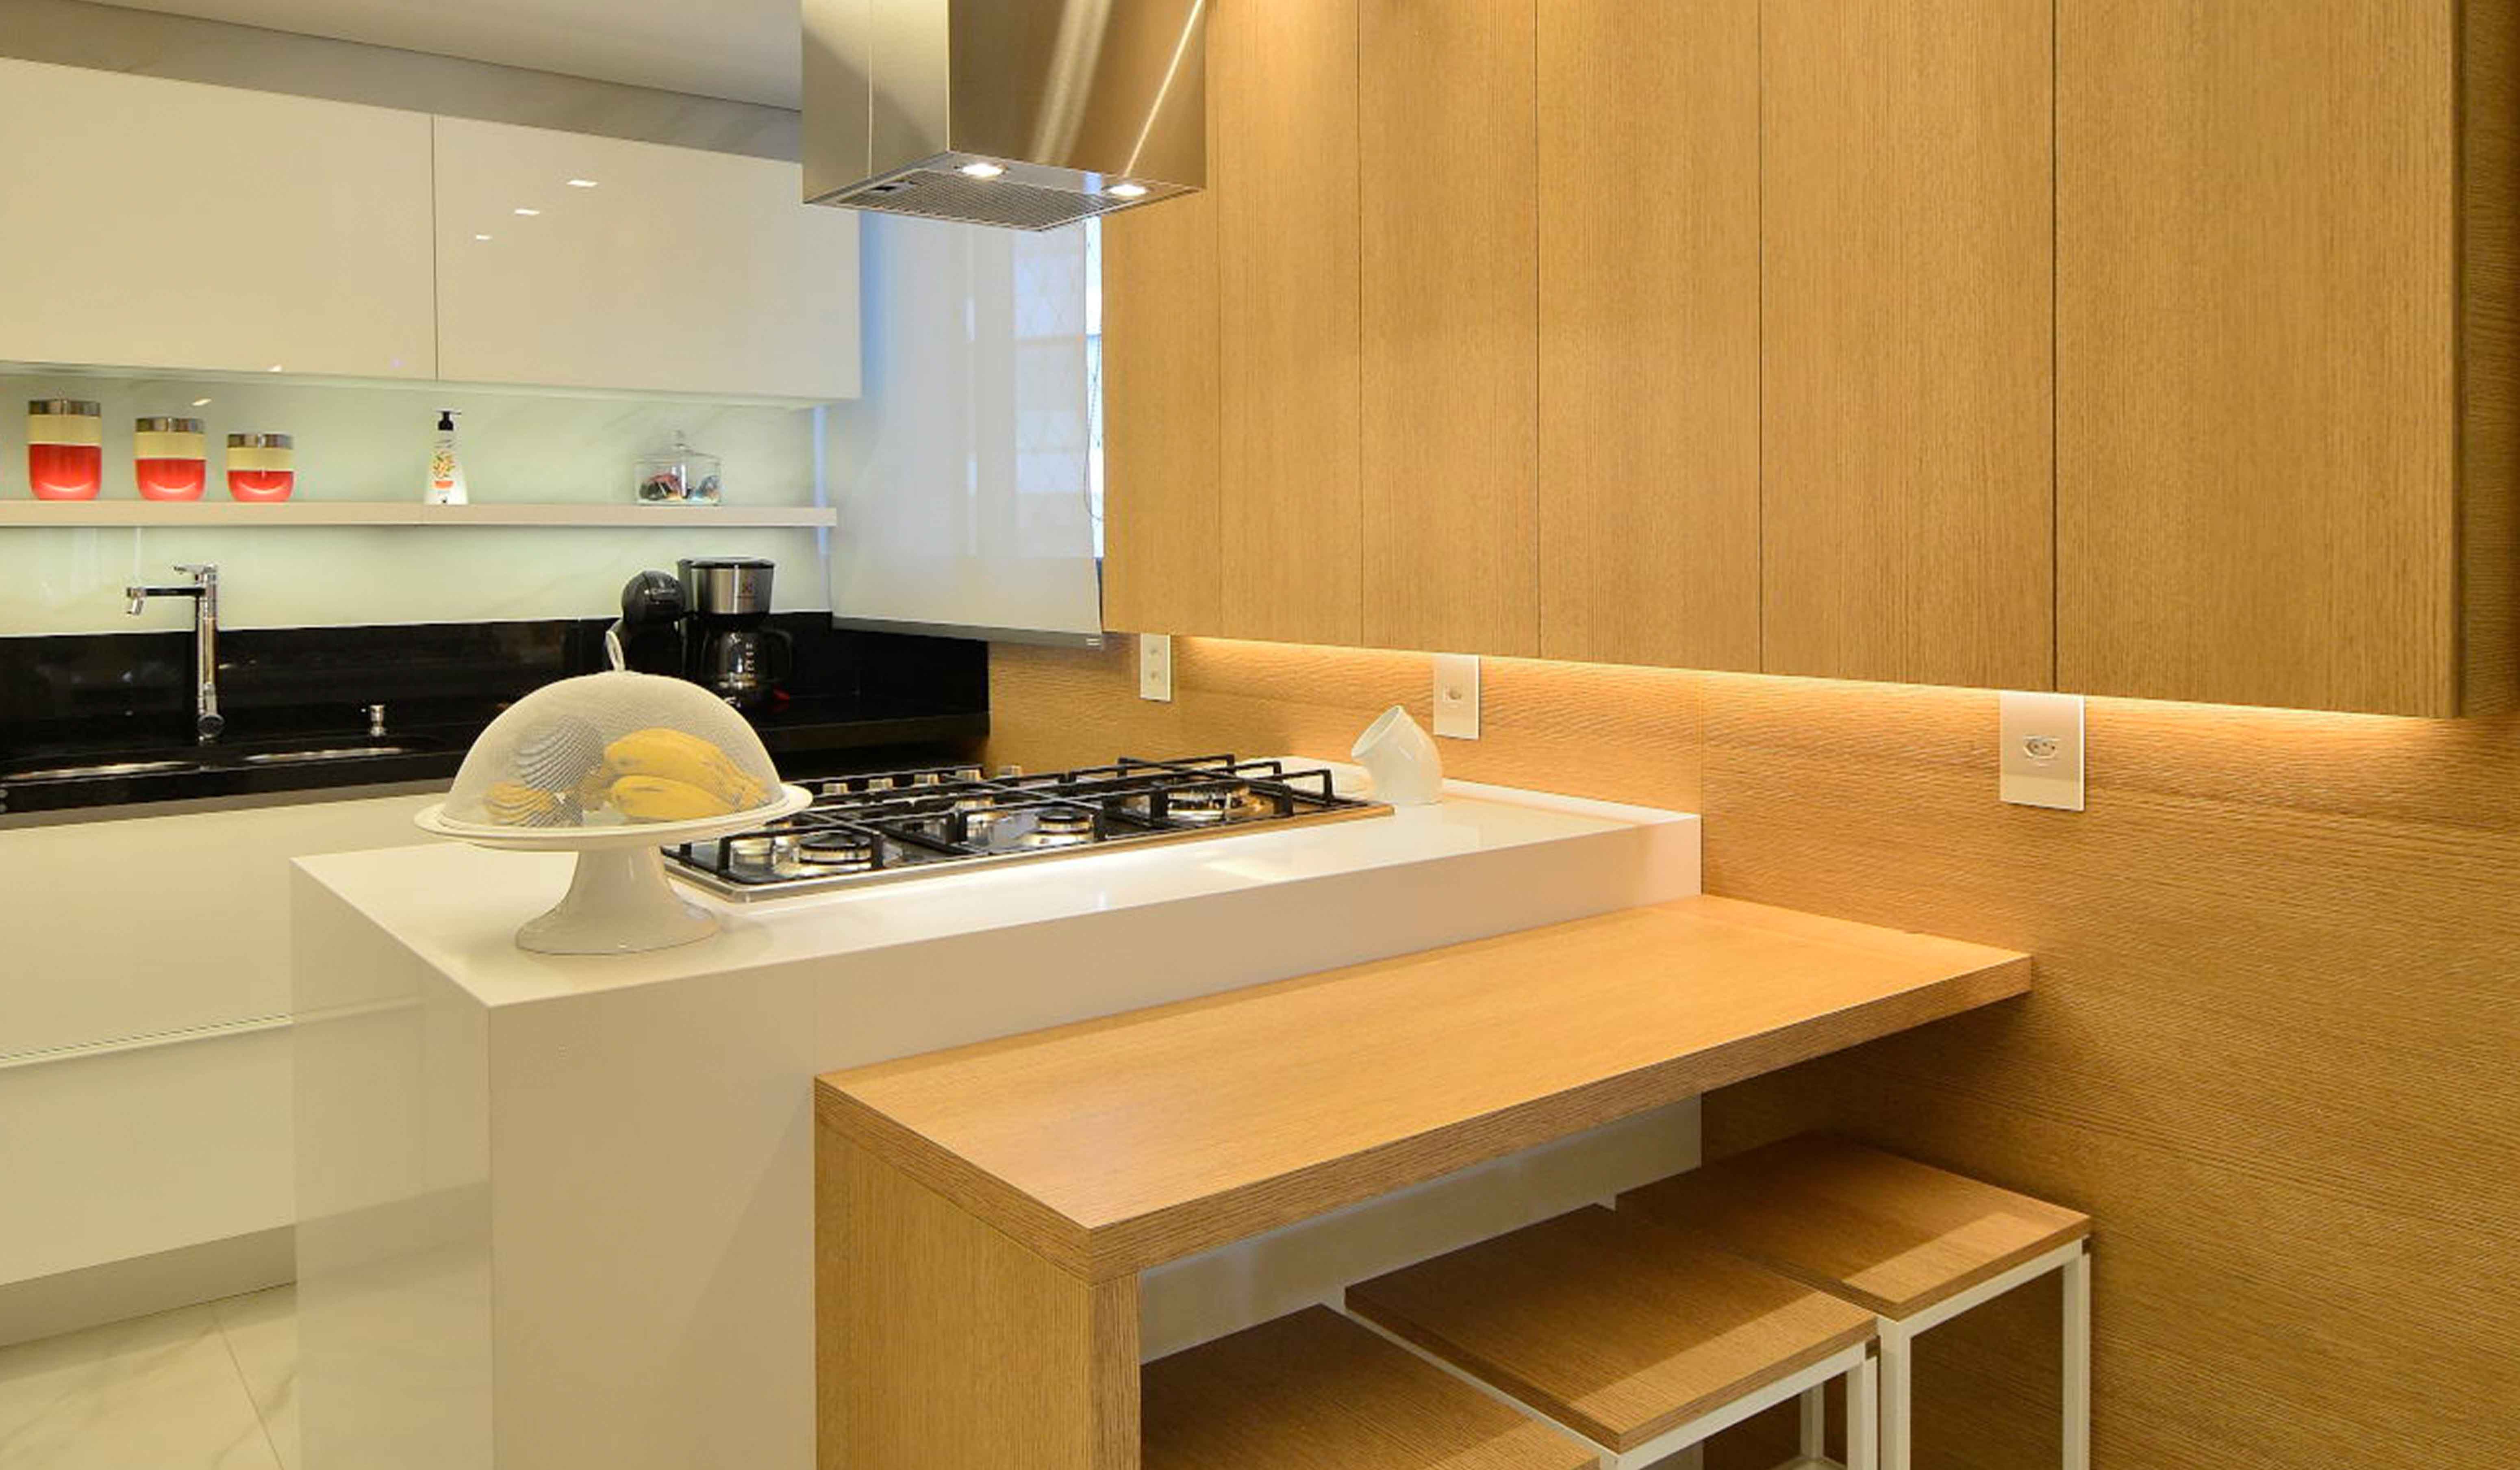 Dell Anno Is All About Contemporary Luxury Cabinetry, Timeless Design And Fine Craftsmanship.